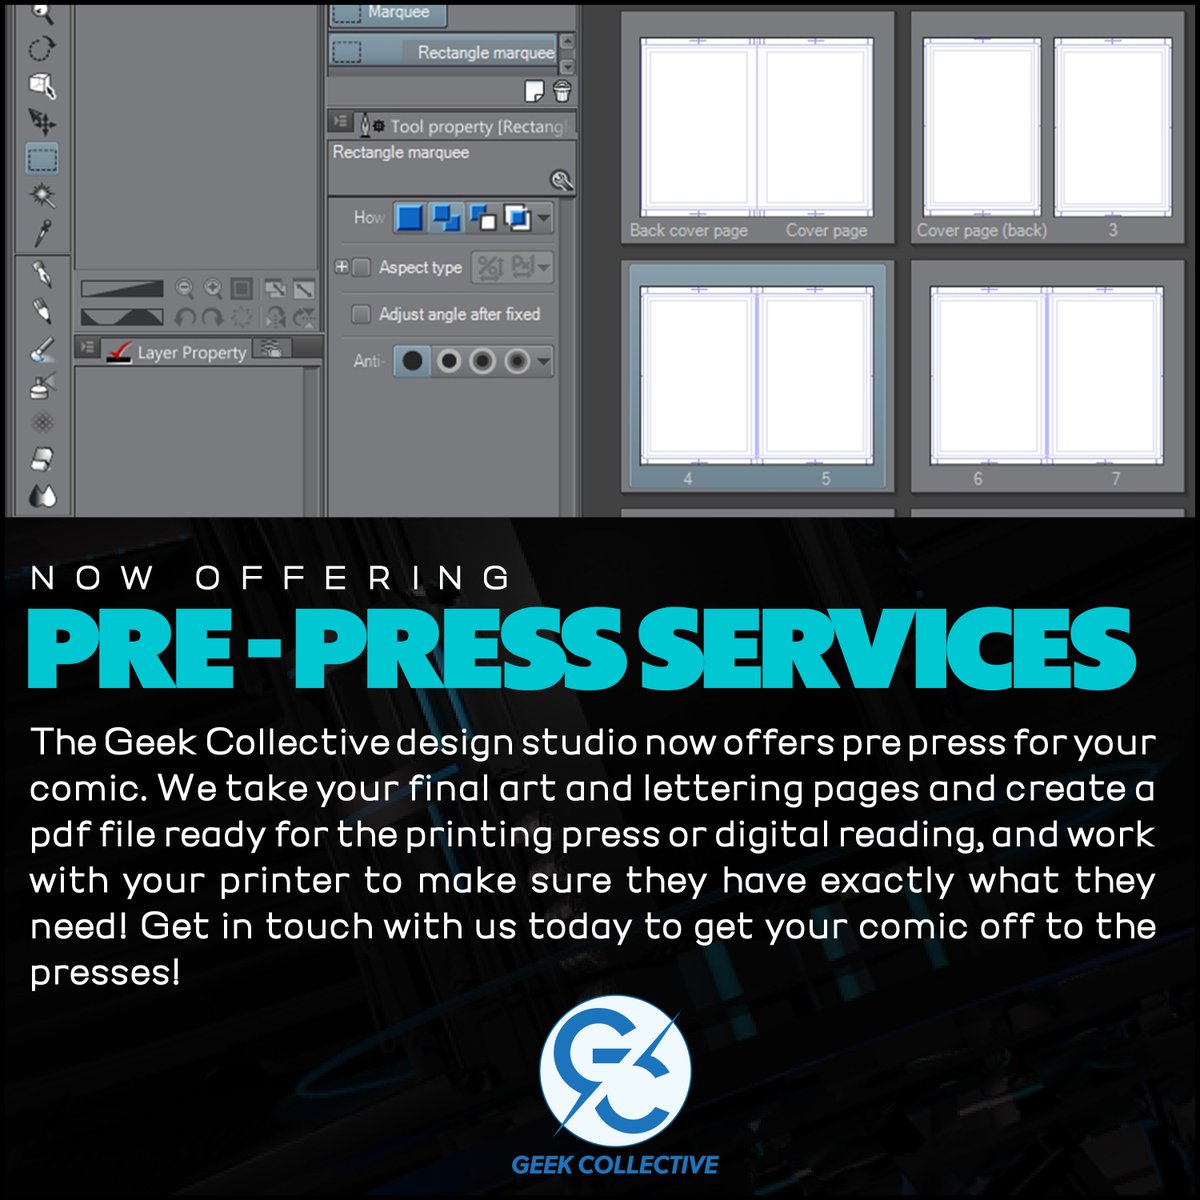 We also help with Prepress & Design
email at info@geekcollective.net